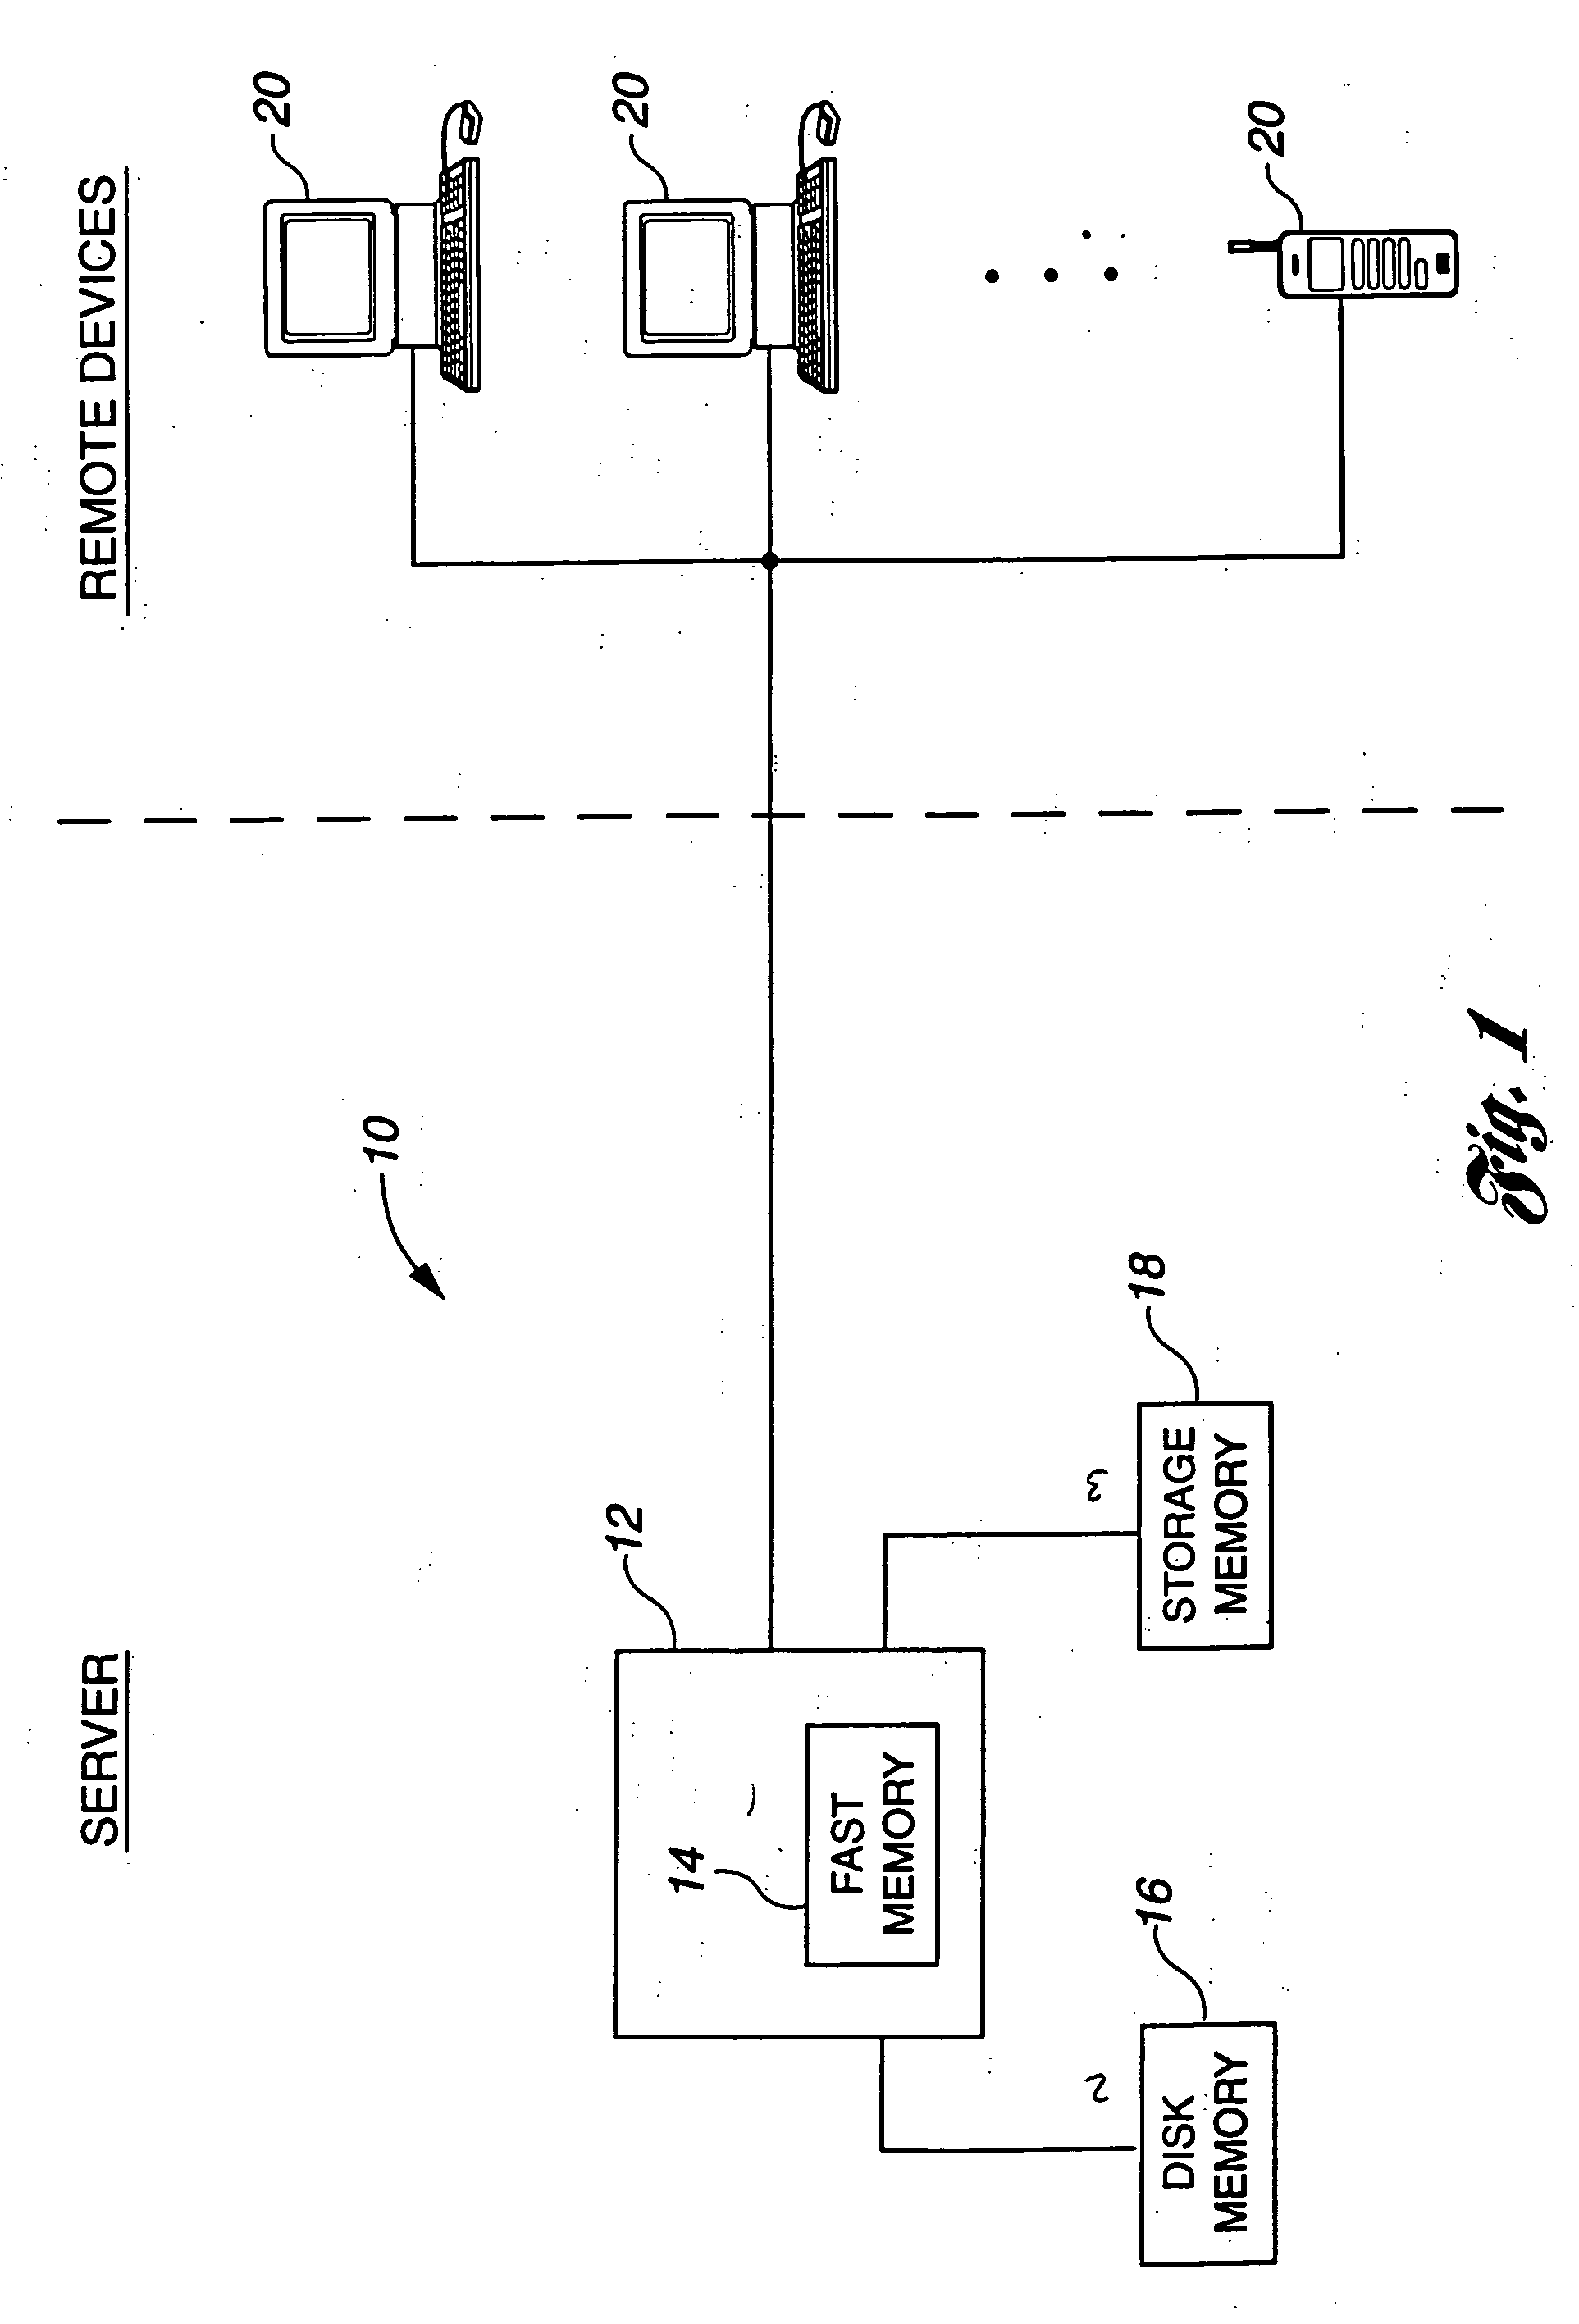 Method and system for efficiently storing web pages for quick downloading at a remote device